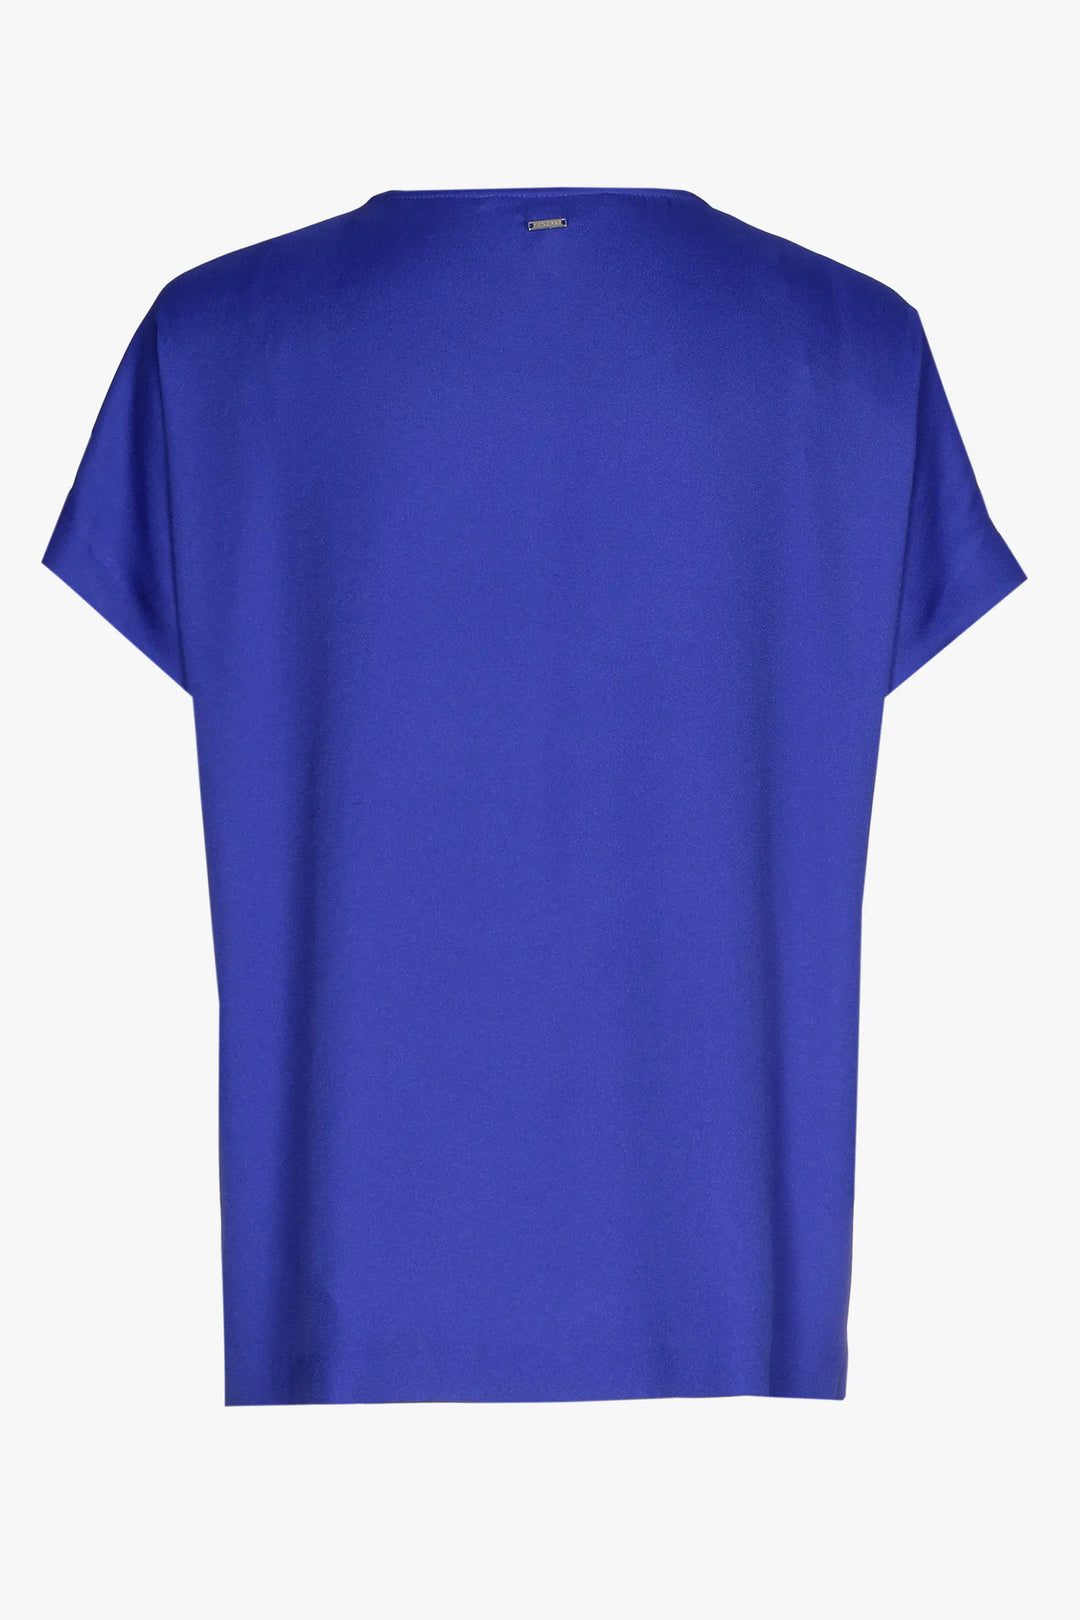 luchtige blouse in royal ink-xandres-